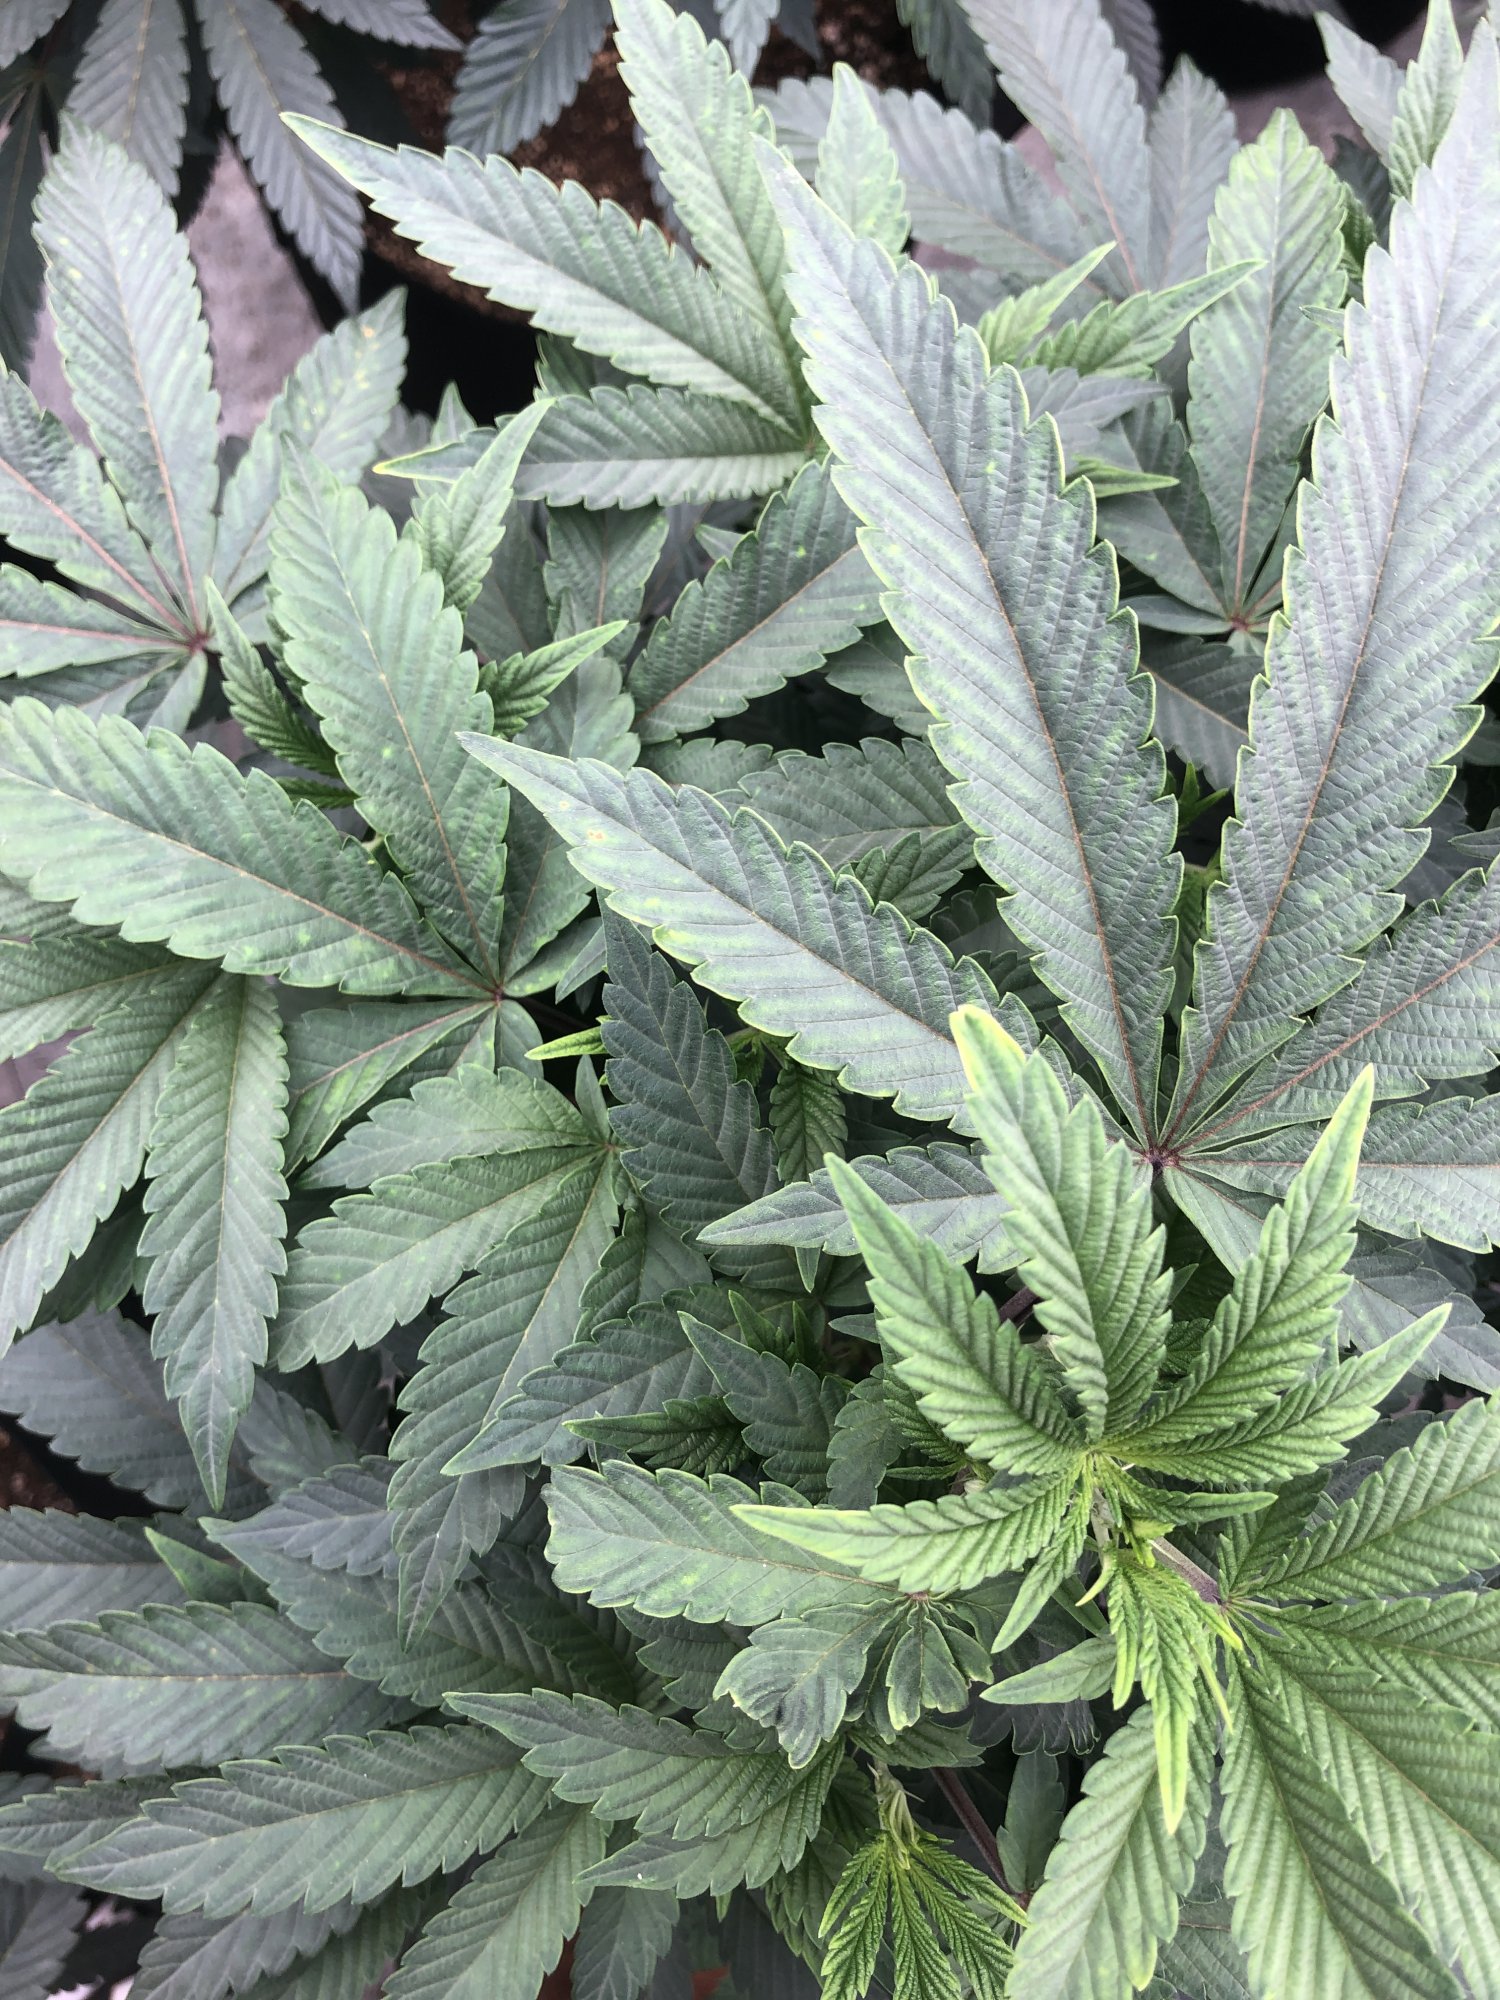 What could this deficiency help